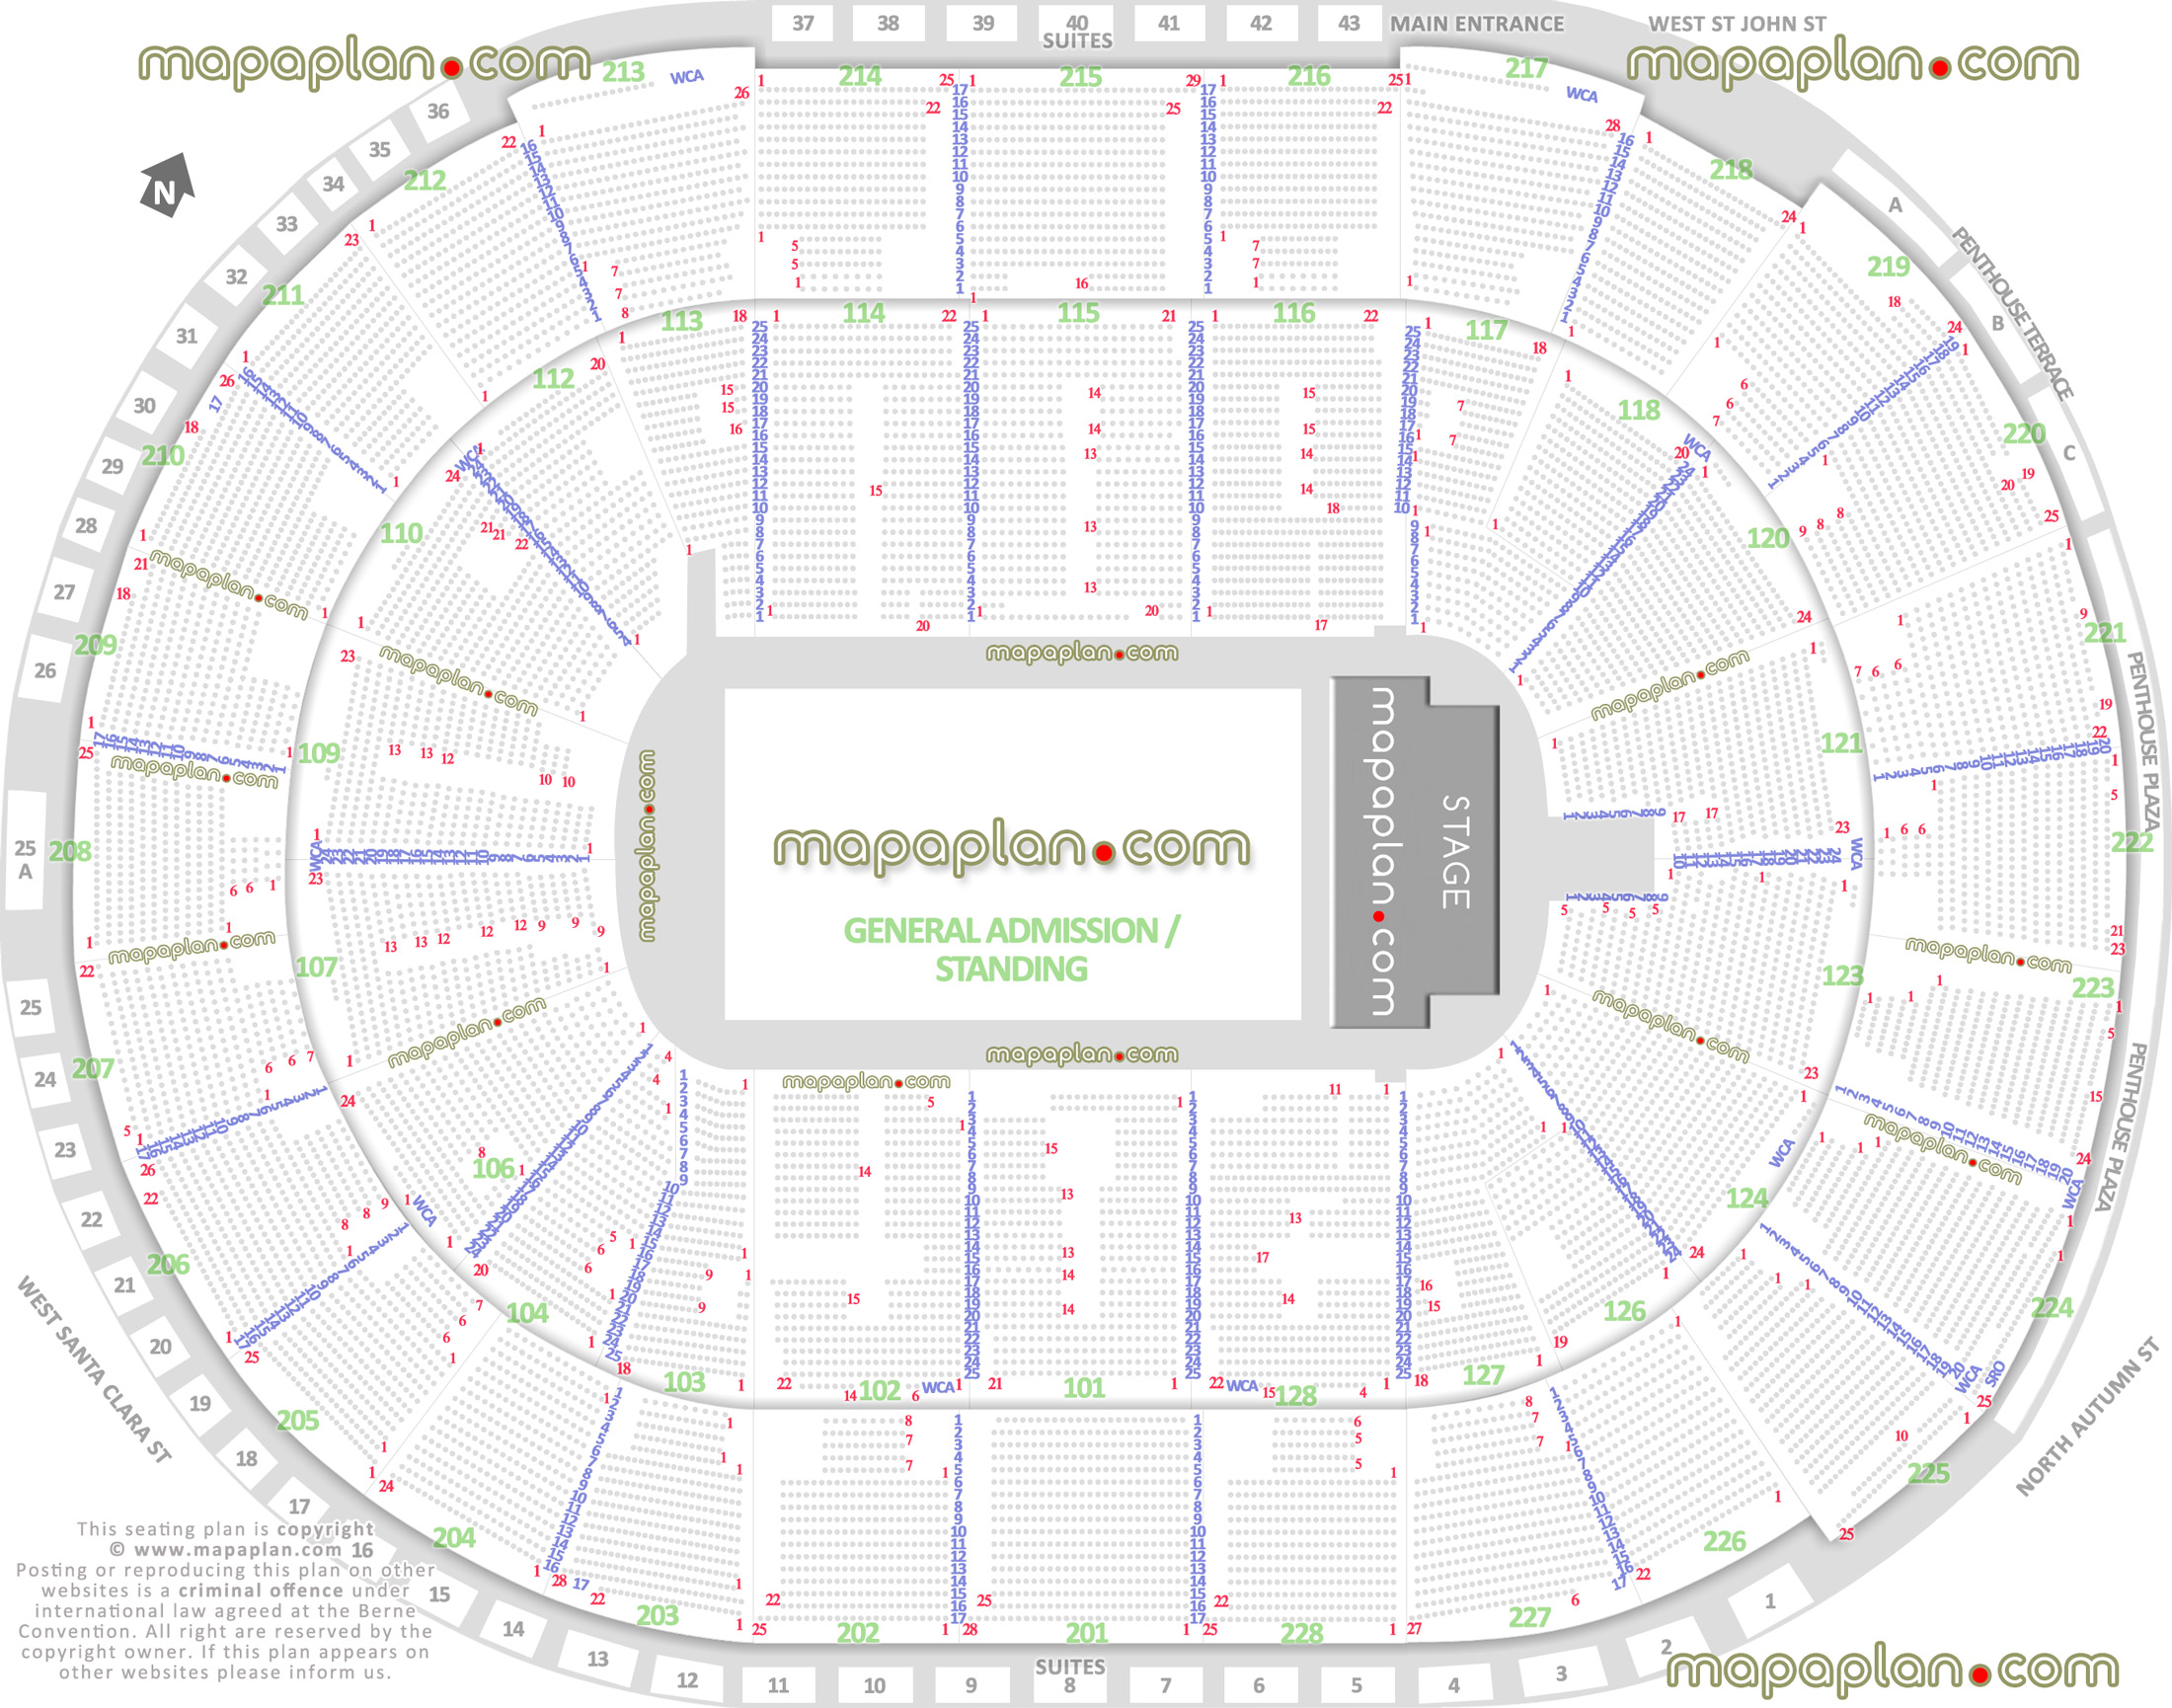 general admission ga floor standing concert capacity plan sap centre ca san jose arena concert stage floor pit plan sections best seat selection information guide virtual interactive image map San Jose SAP Center seating chart